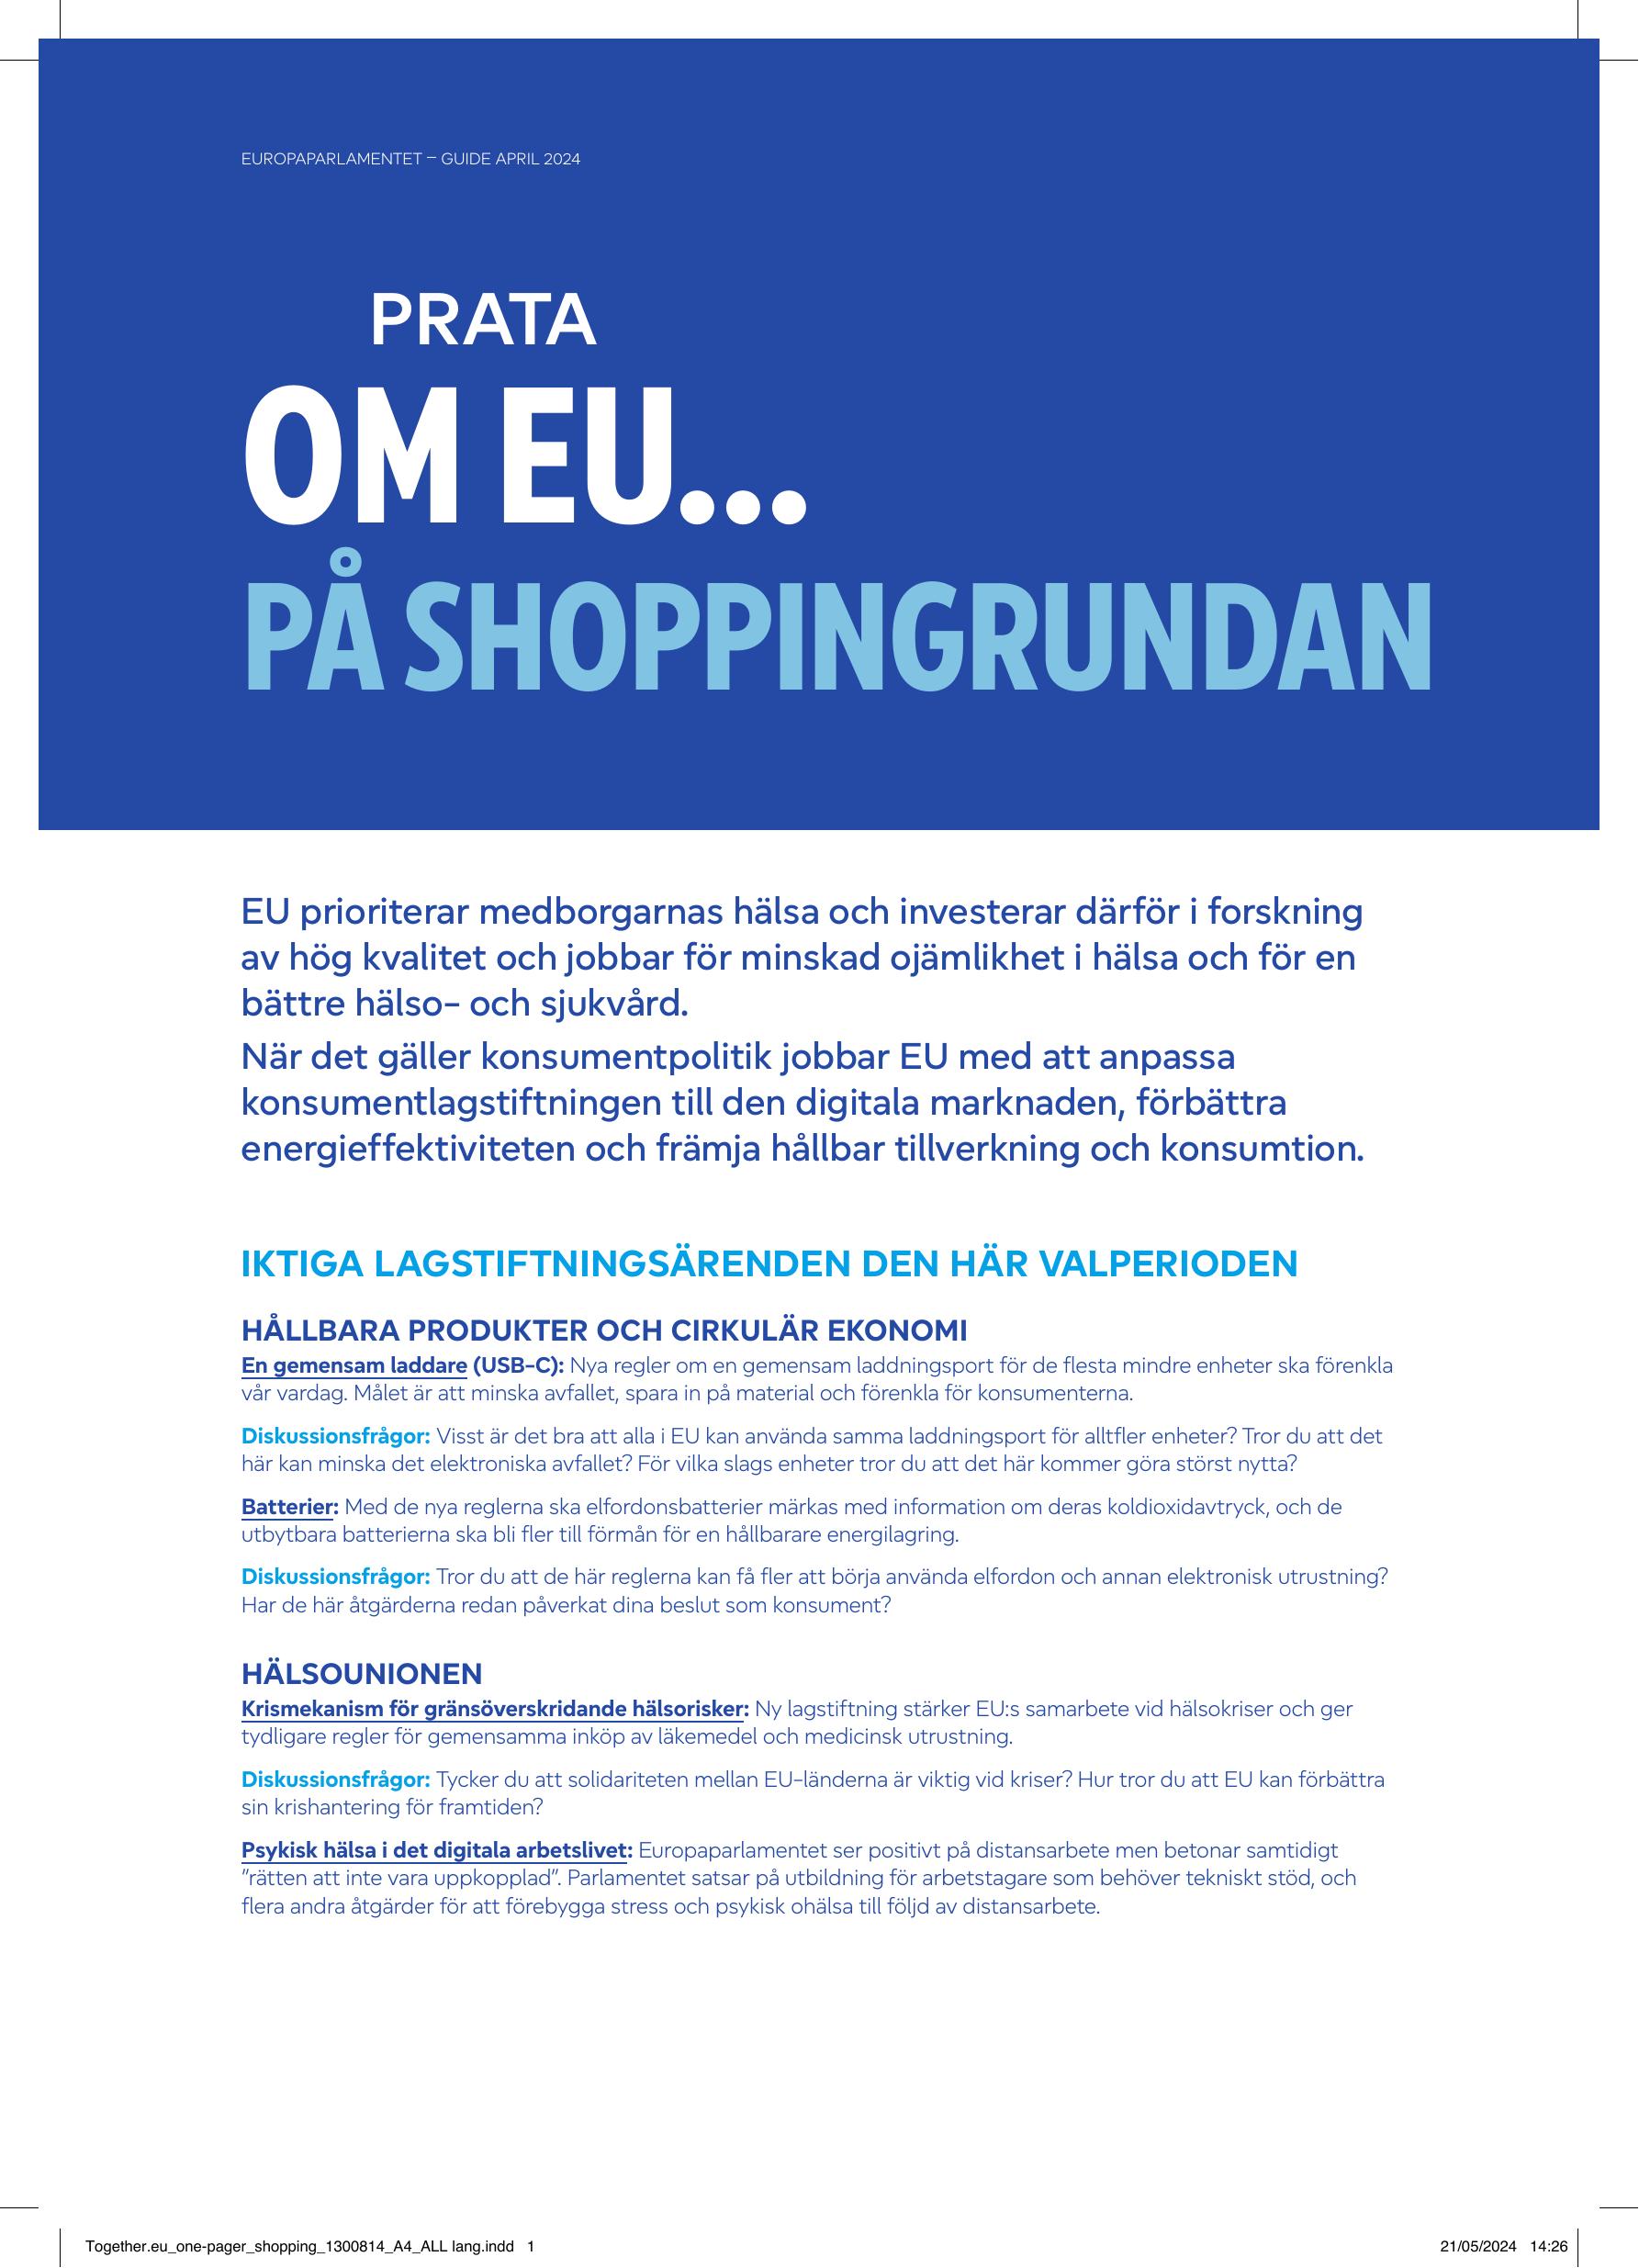 Together.eu_one-pager_shopping_print.pdf